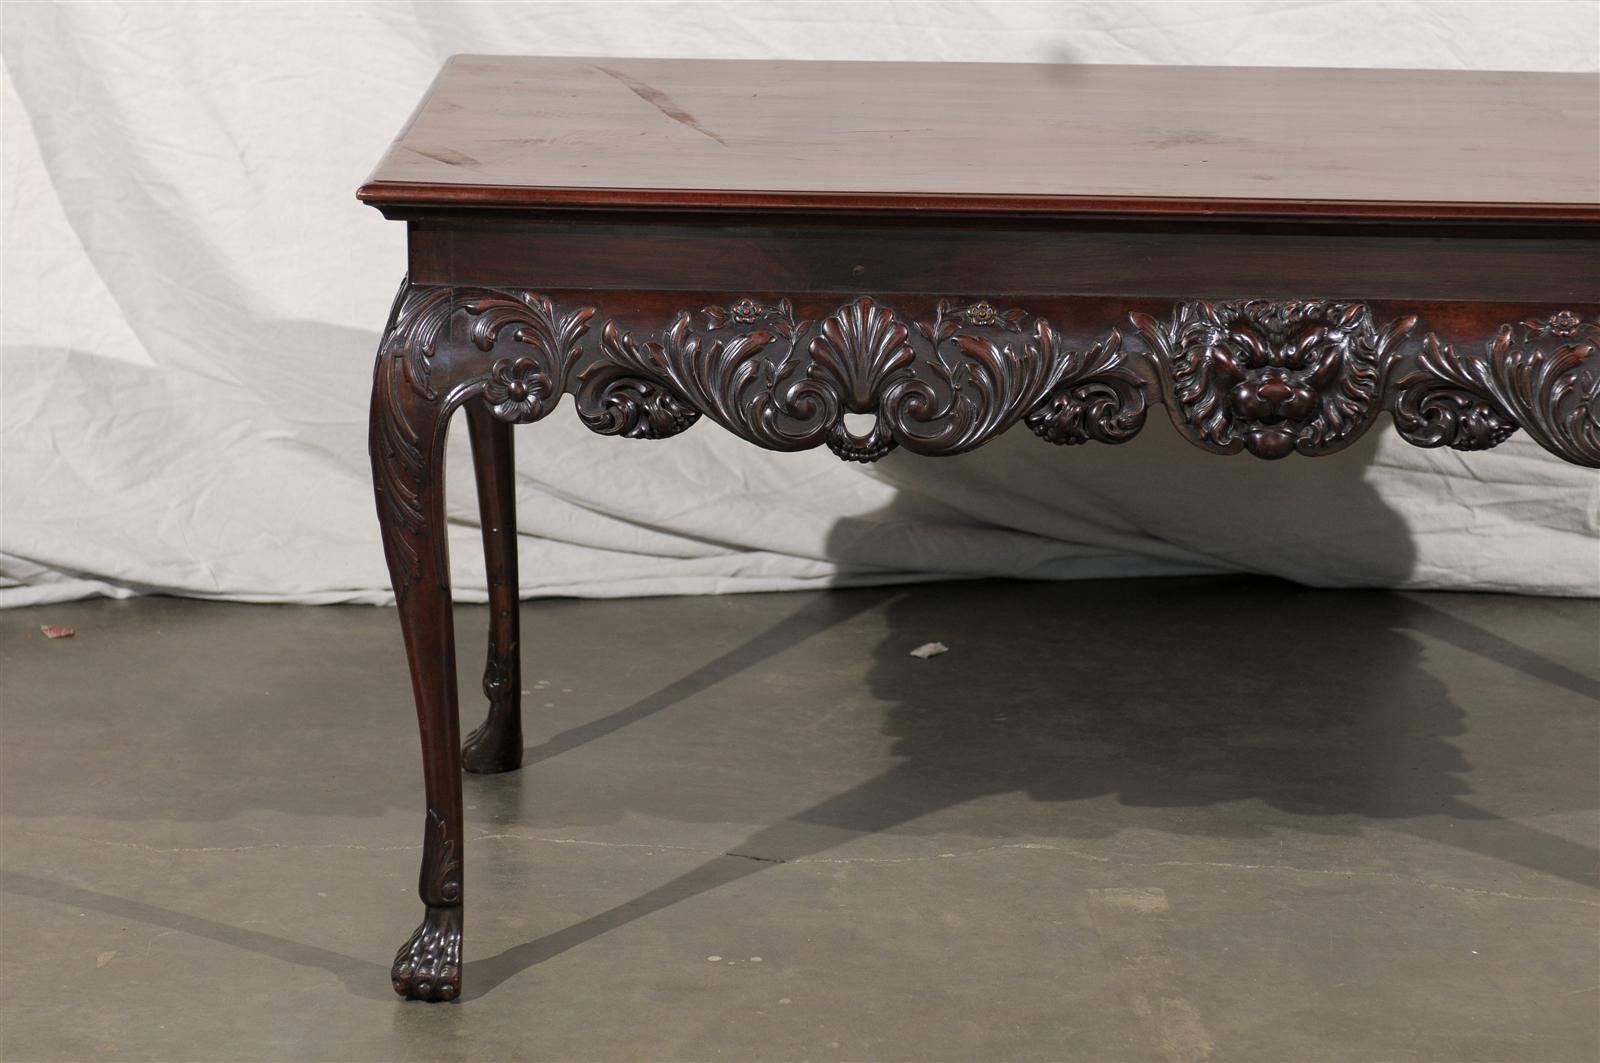 Icelandic Early 19th Century Irish Center Table with Lion Mask